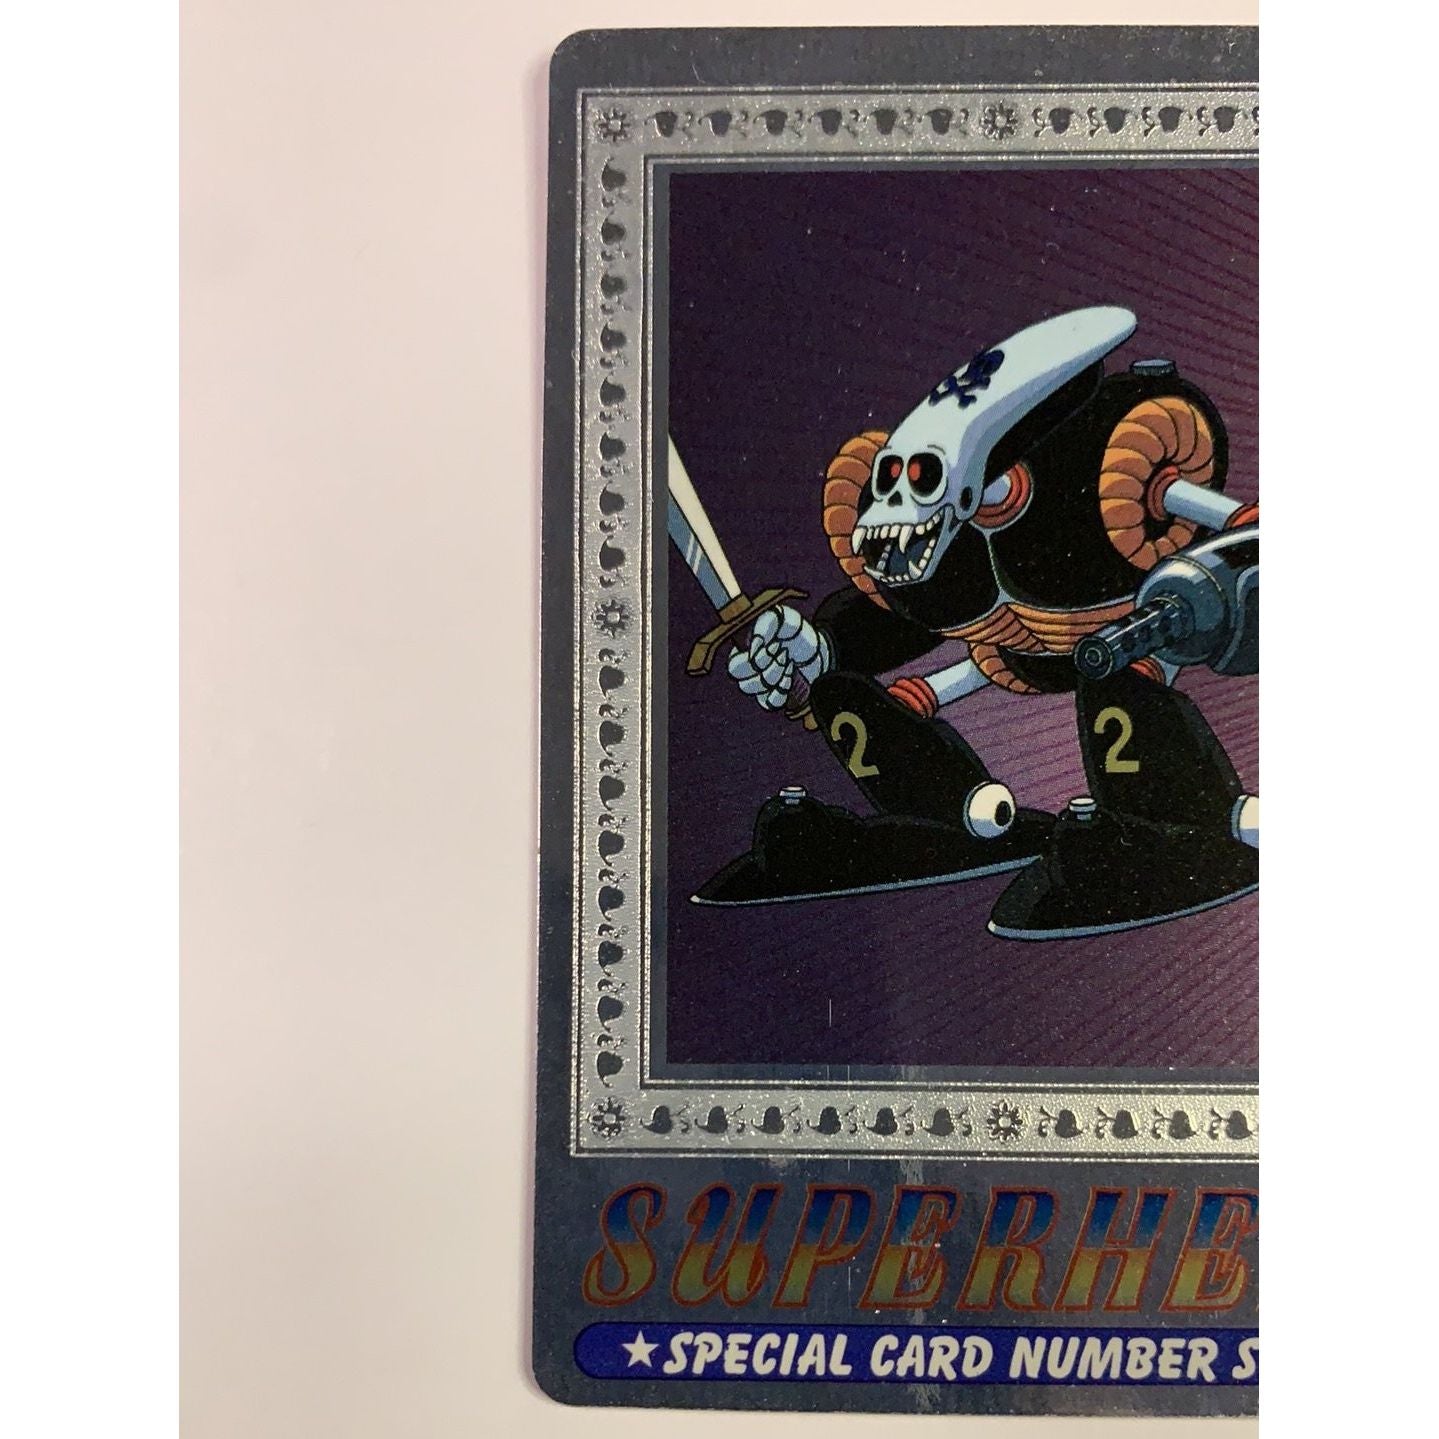  1995 Cardass Adali Super Hero Special Card S-109 Silver Foil  Local Legends Cards & Collectibles